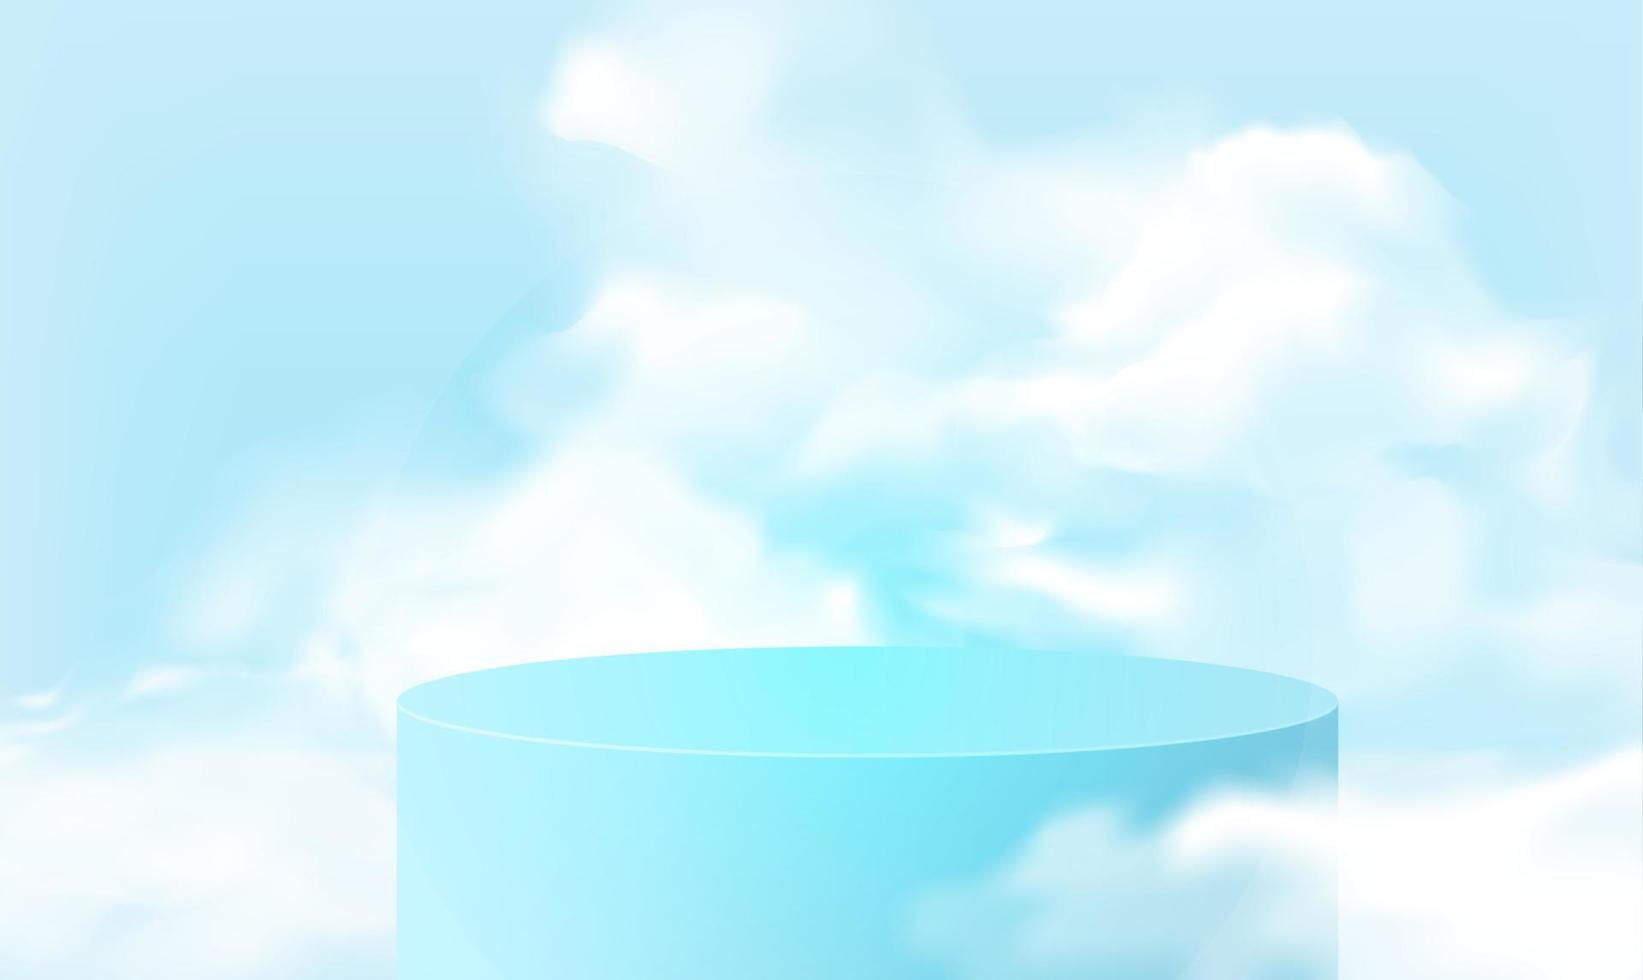 Background product display pastel blue rendered geometric shape with podium and minimal cloudy scene.Vector illustration vector